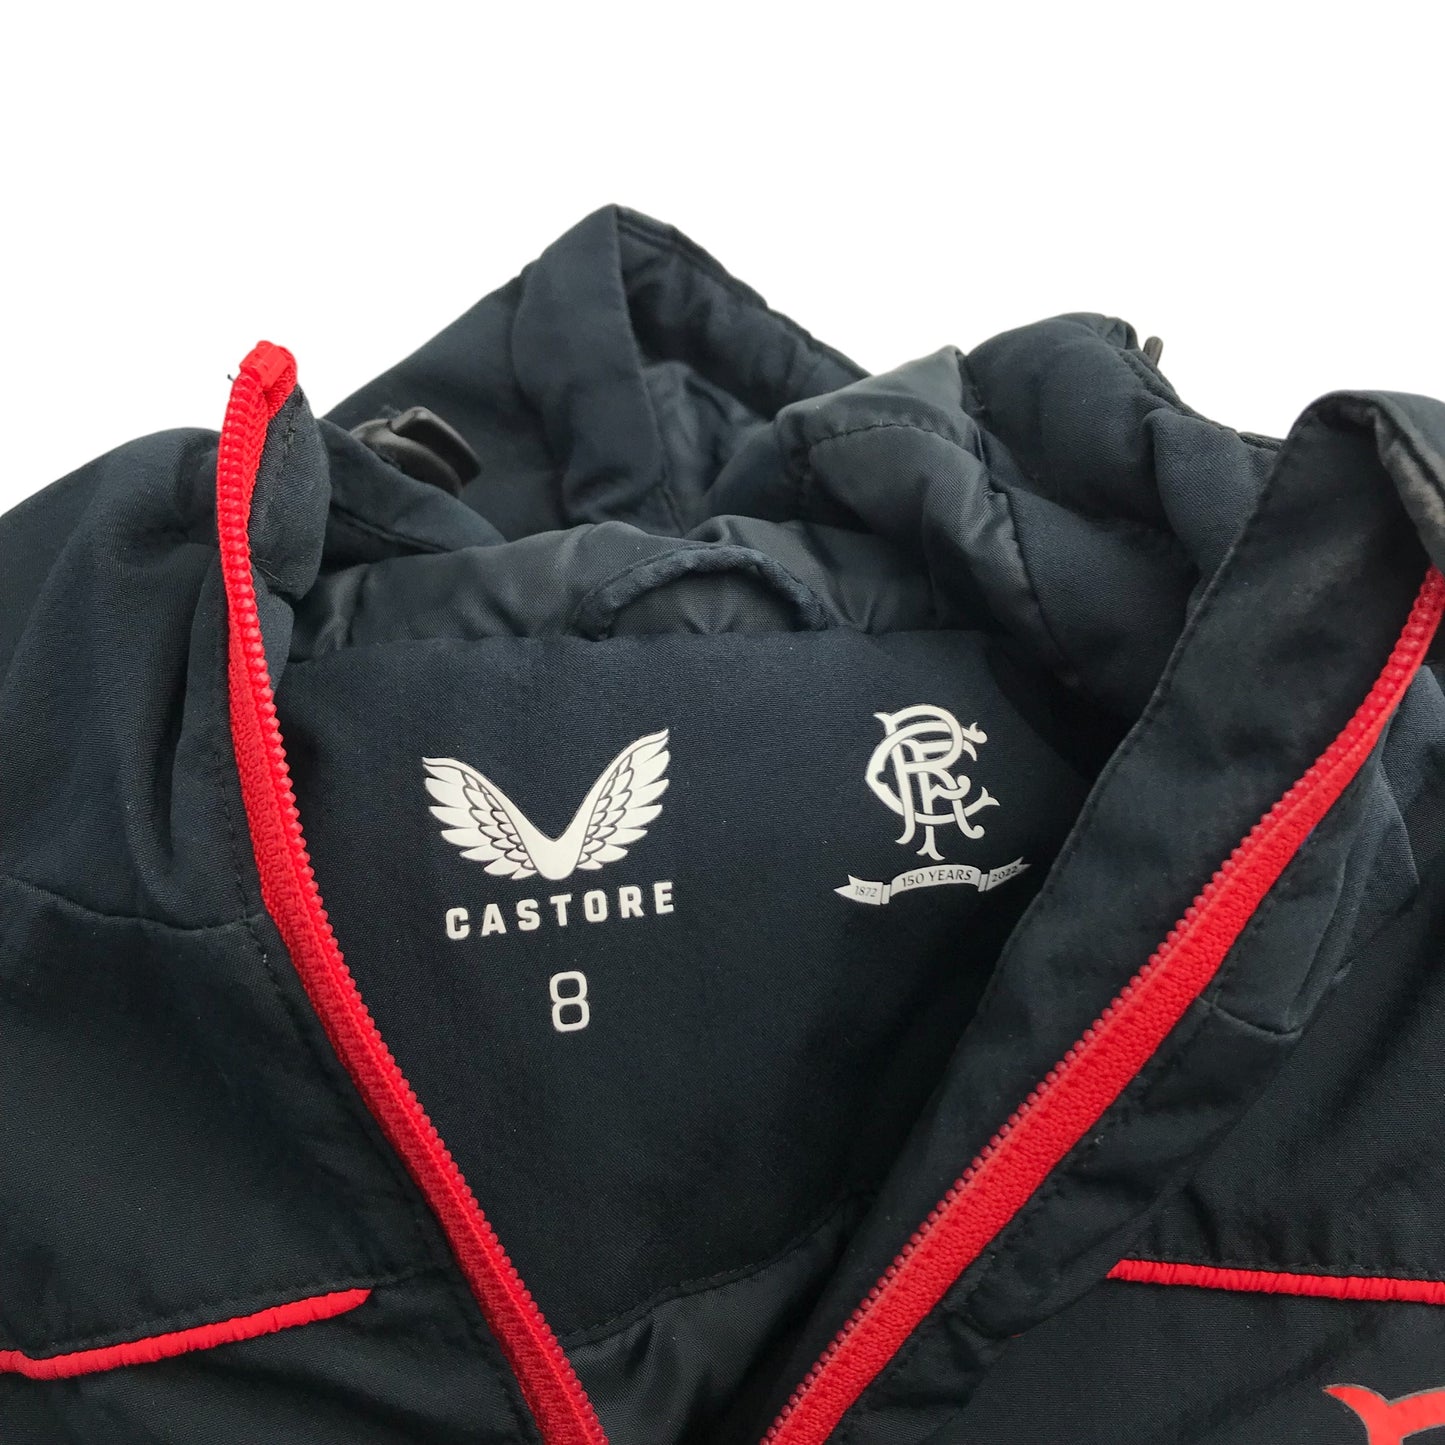 Castore Rangers FC Jacket Age 13 Black and Red Long Warm Lined